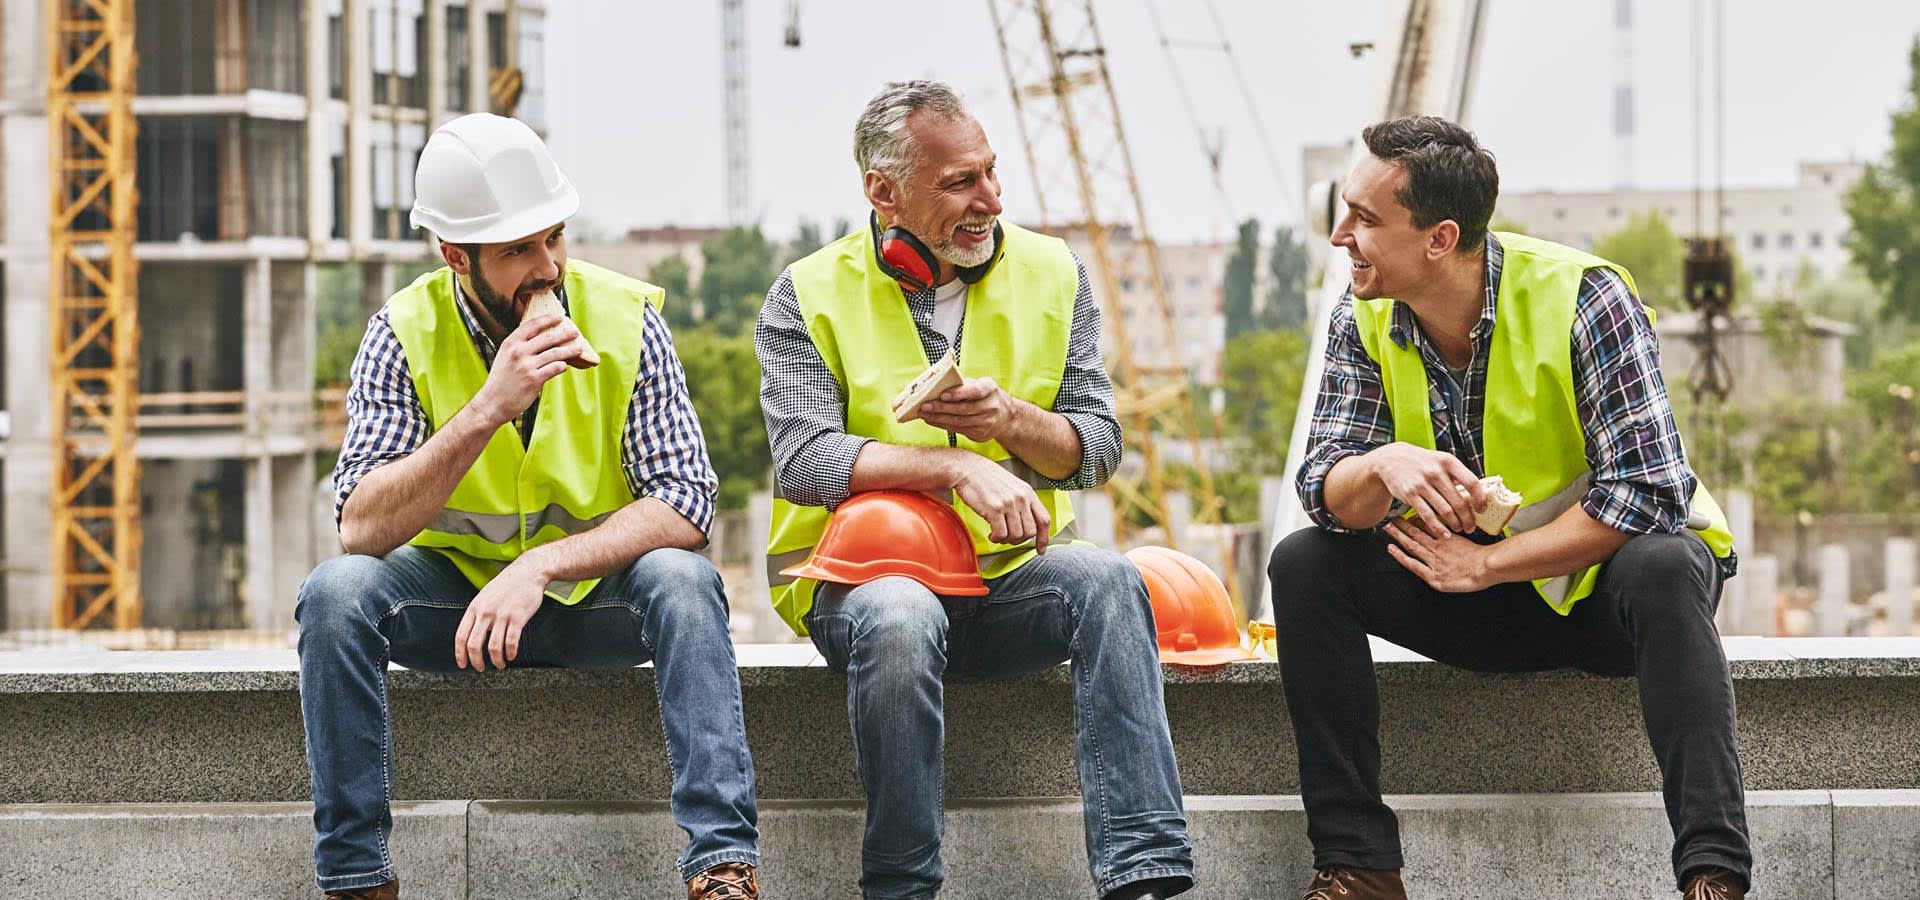 Three smile and construction workers converse over a lunch of sandwiches on the jobsite